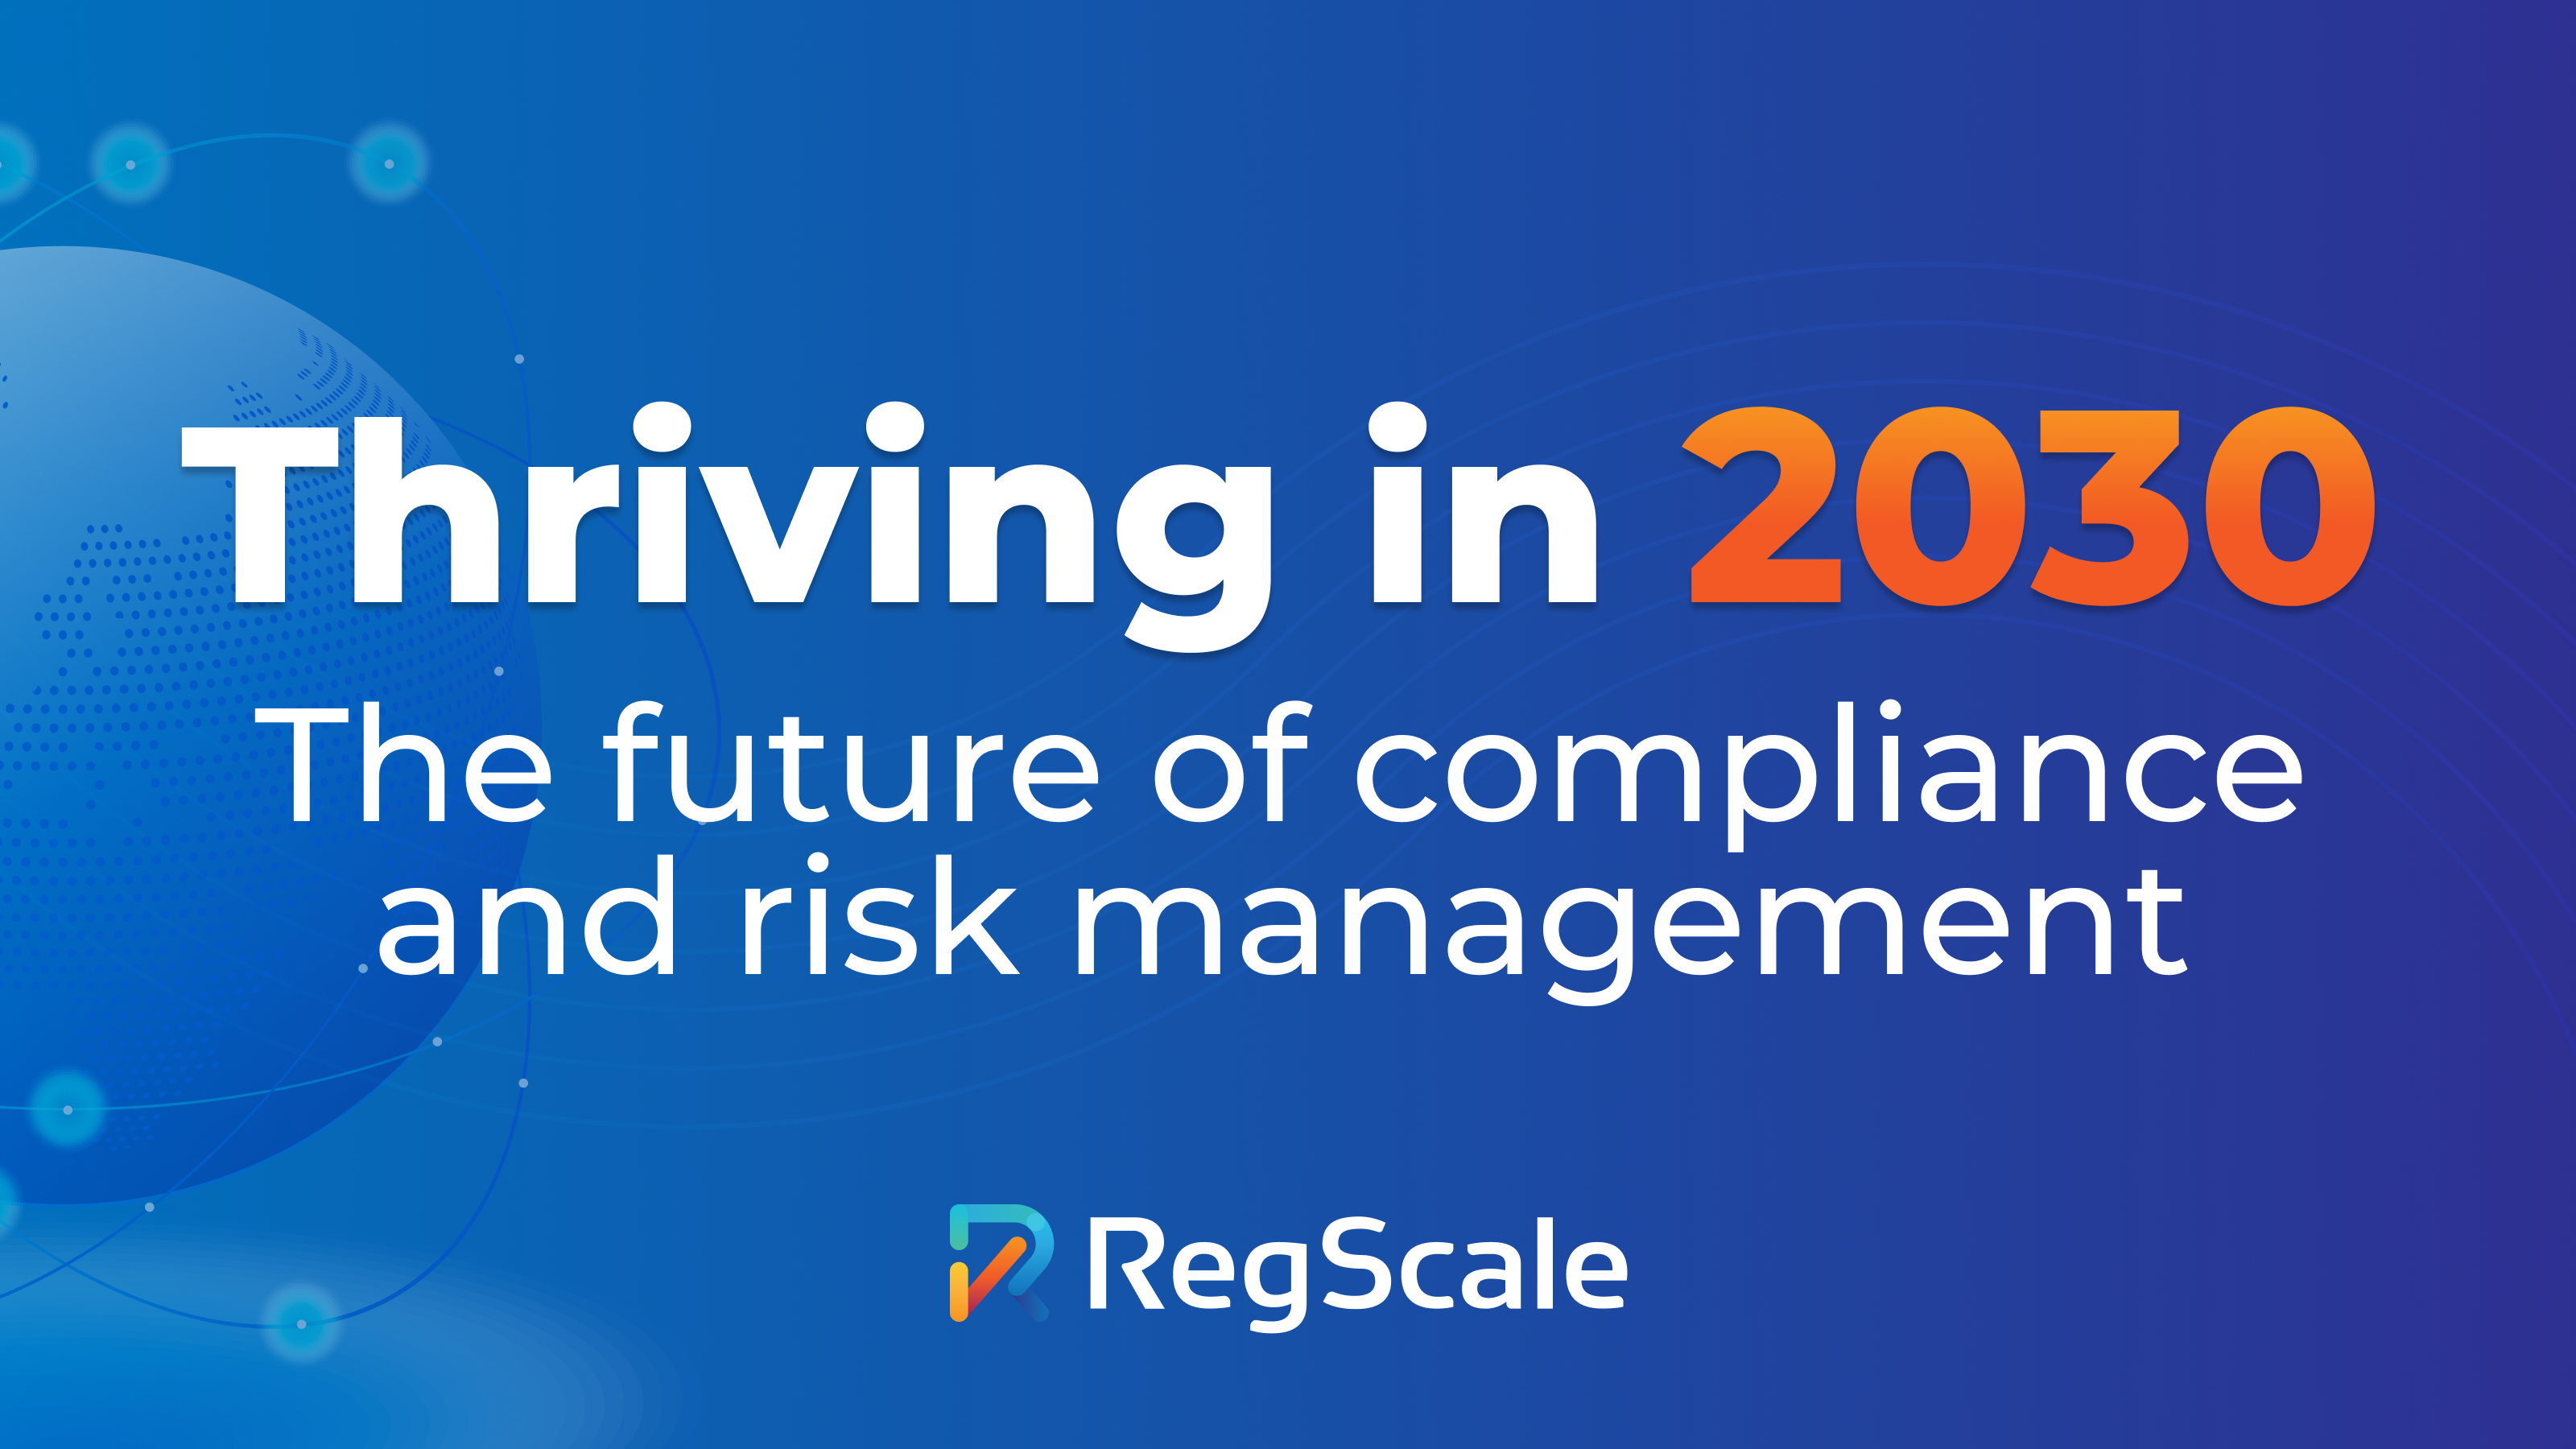 Thriving in 2030: The future of compliance and risk management